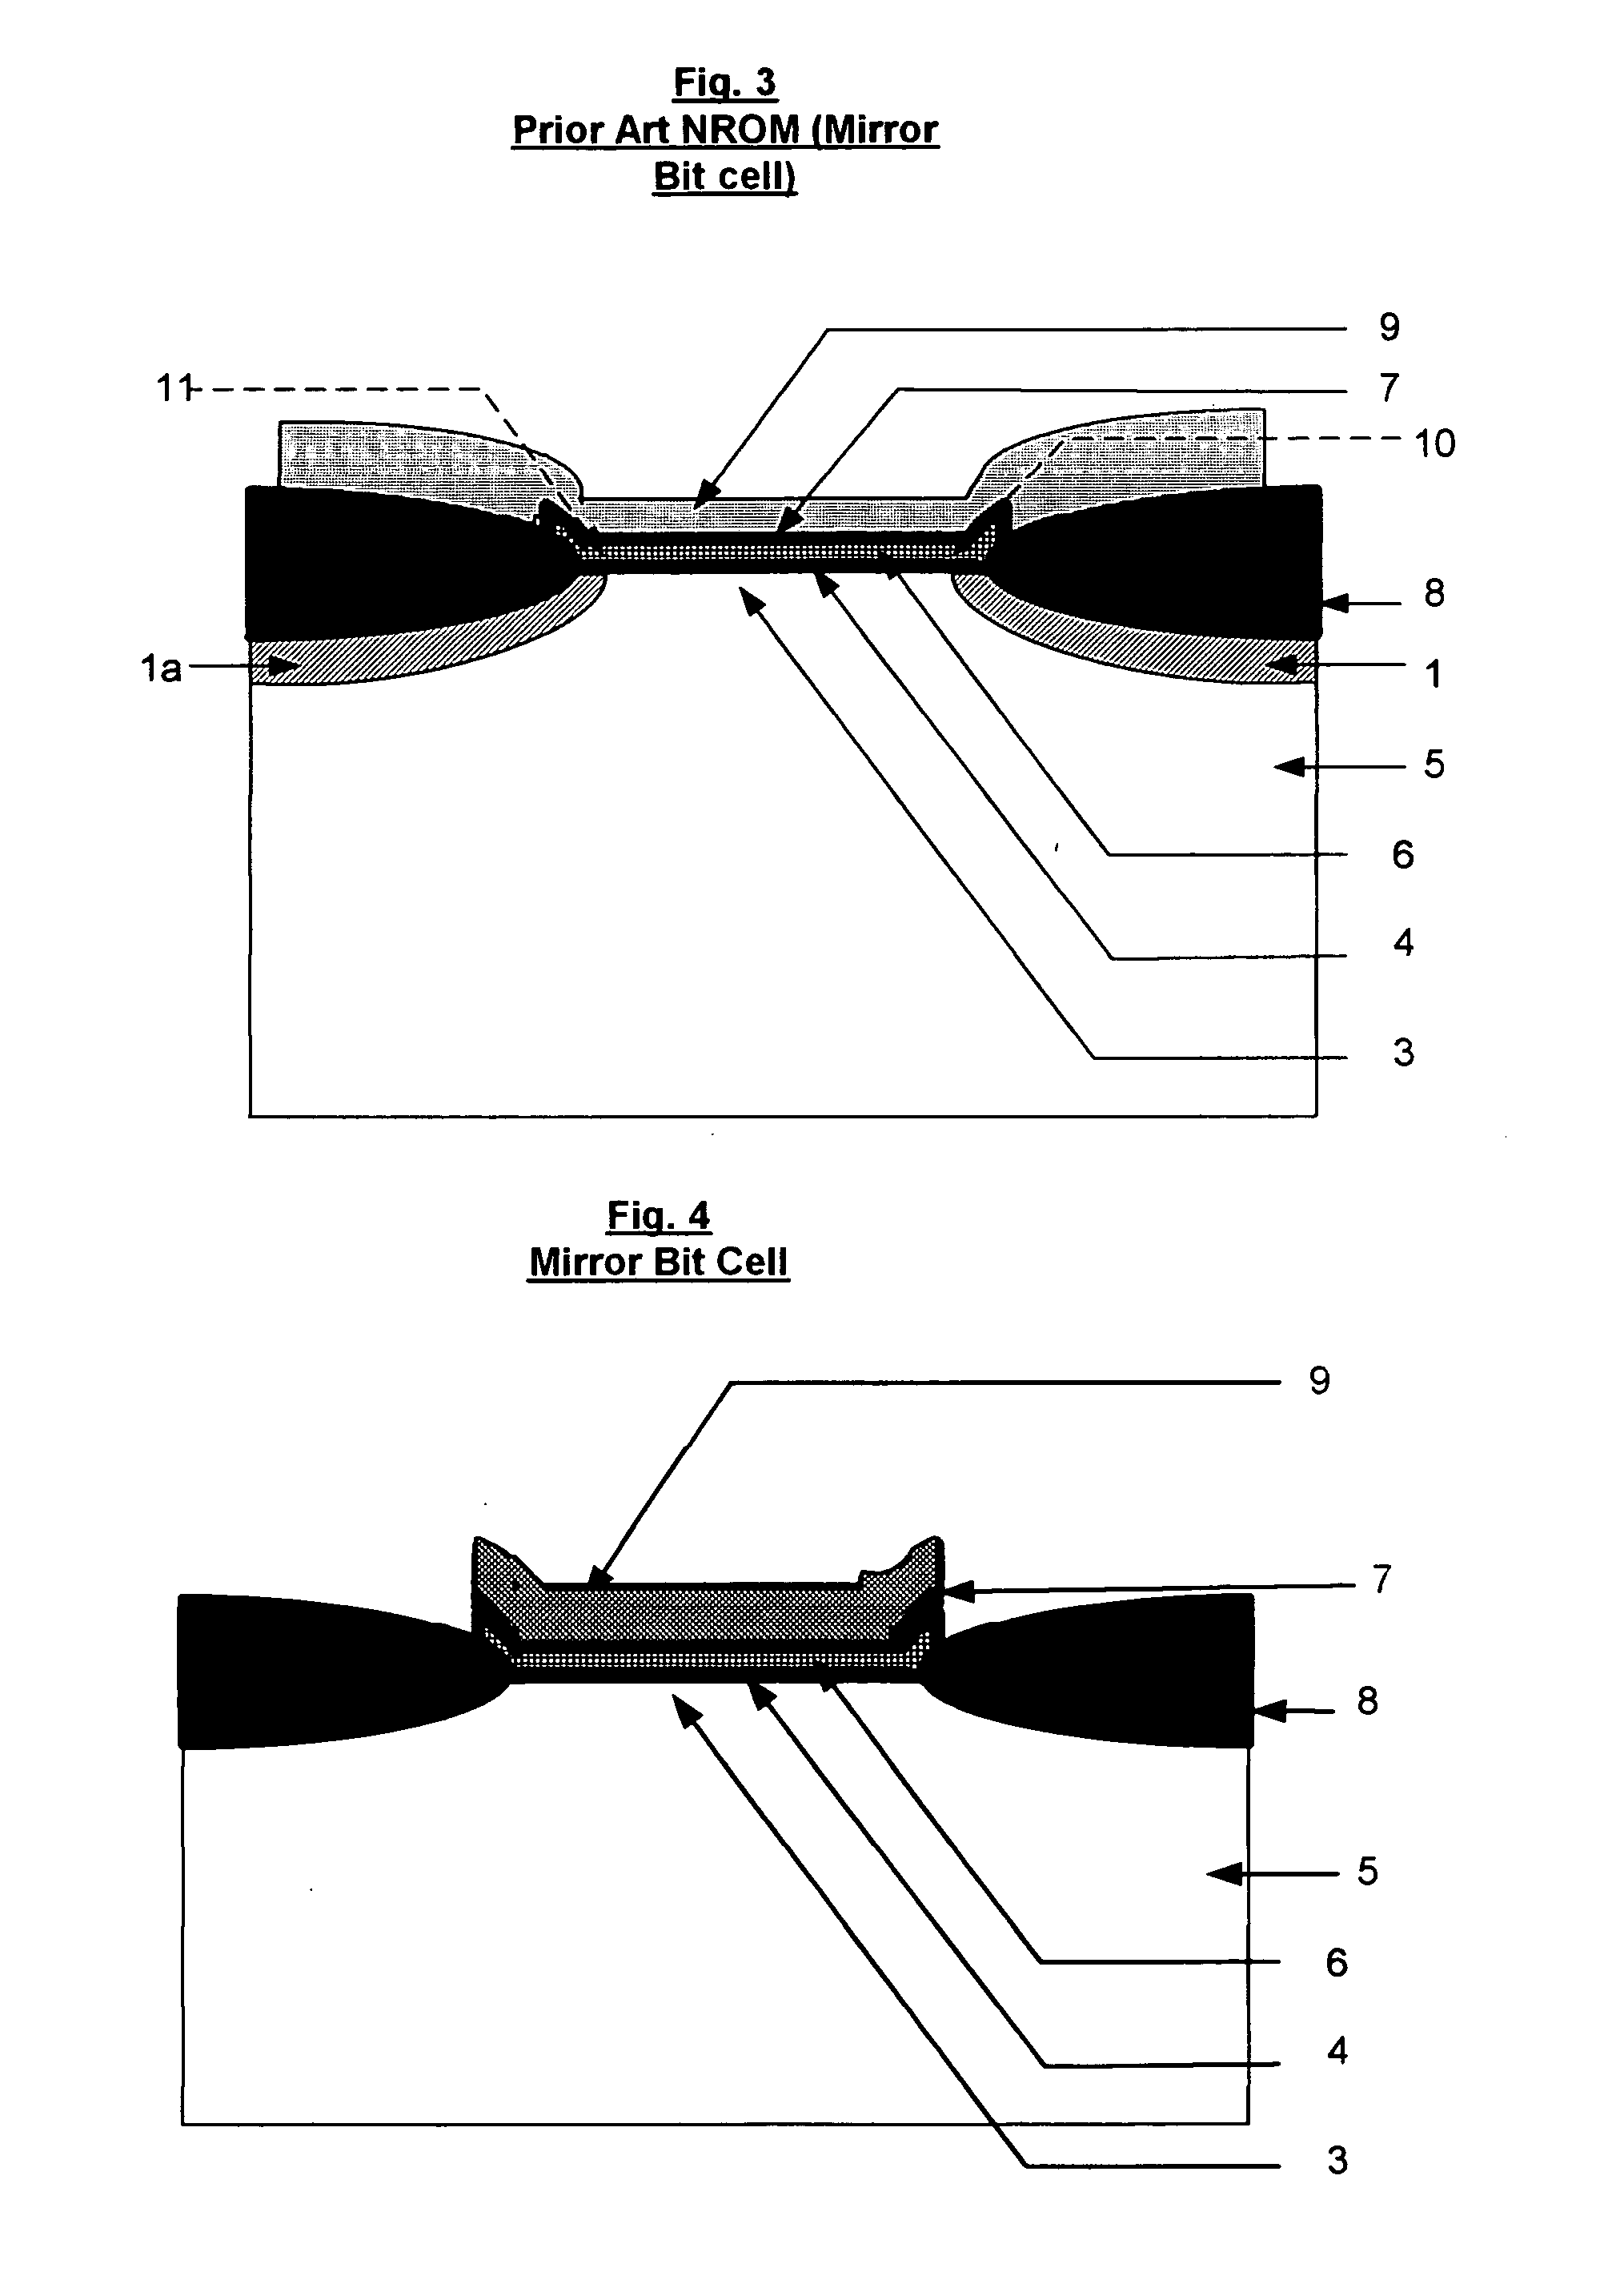 Location-specific NAND (ls NAND) memory technology and cells